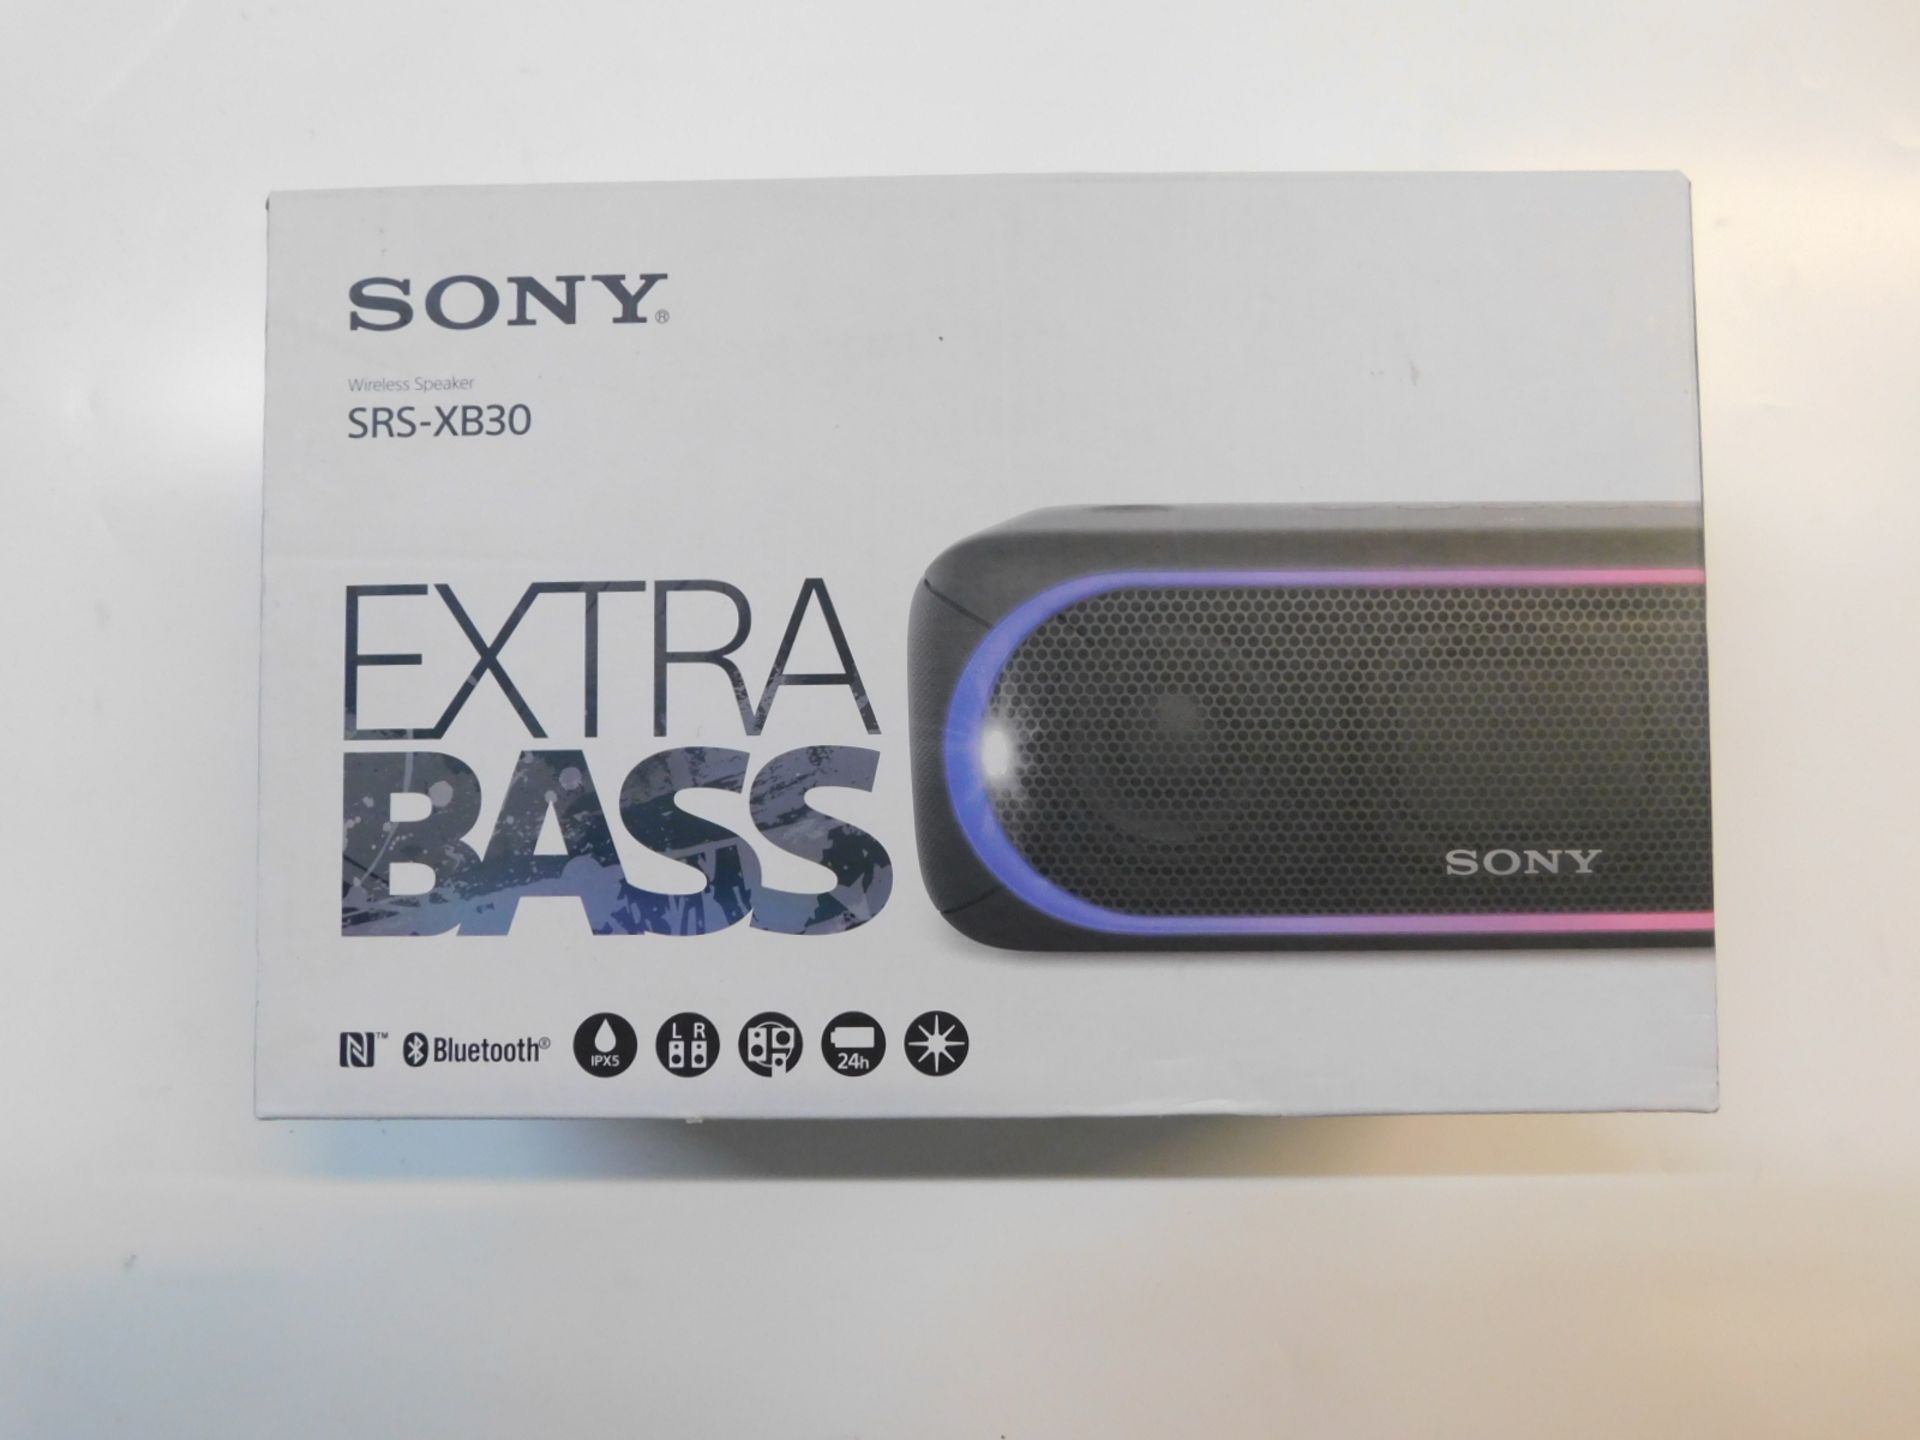 1 BOXED SONY SRS-XB30 EXTRA BASS BLUETOOTH SPEAKER RRP Â£149.99